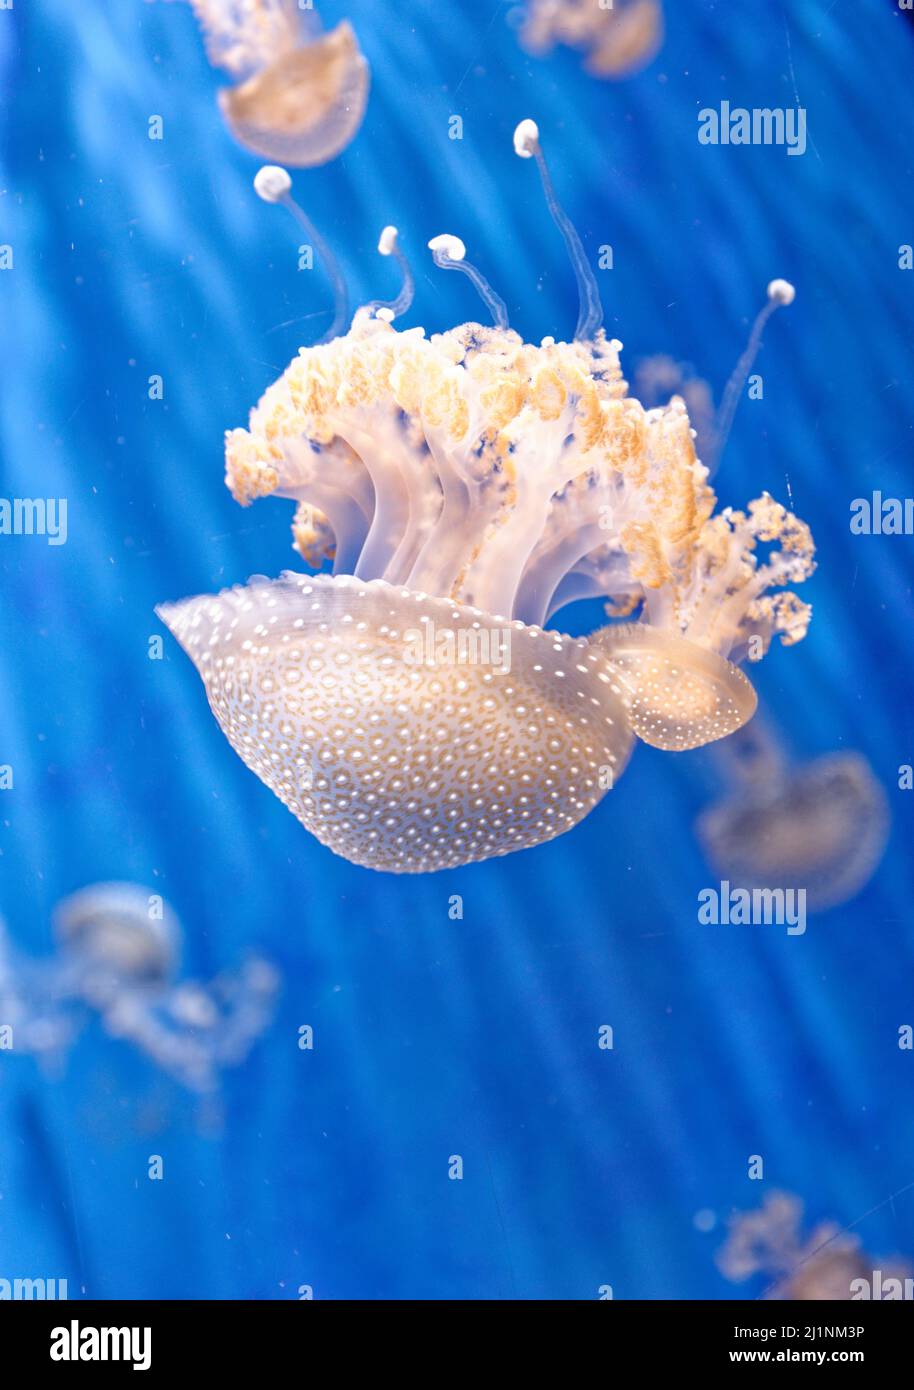 Phyllorhiza punctata - species of jellyfish, known as the floating bell, Australian spotted jellyfish, brown jellyfish or the white-spotted jellyfish. Stock Photo